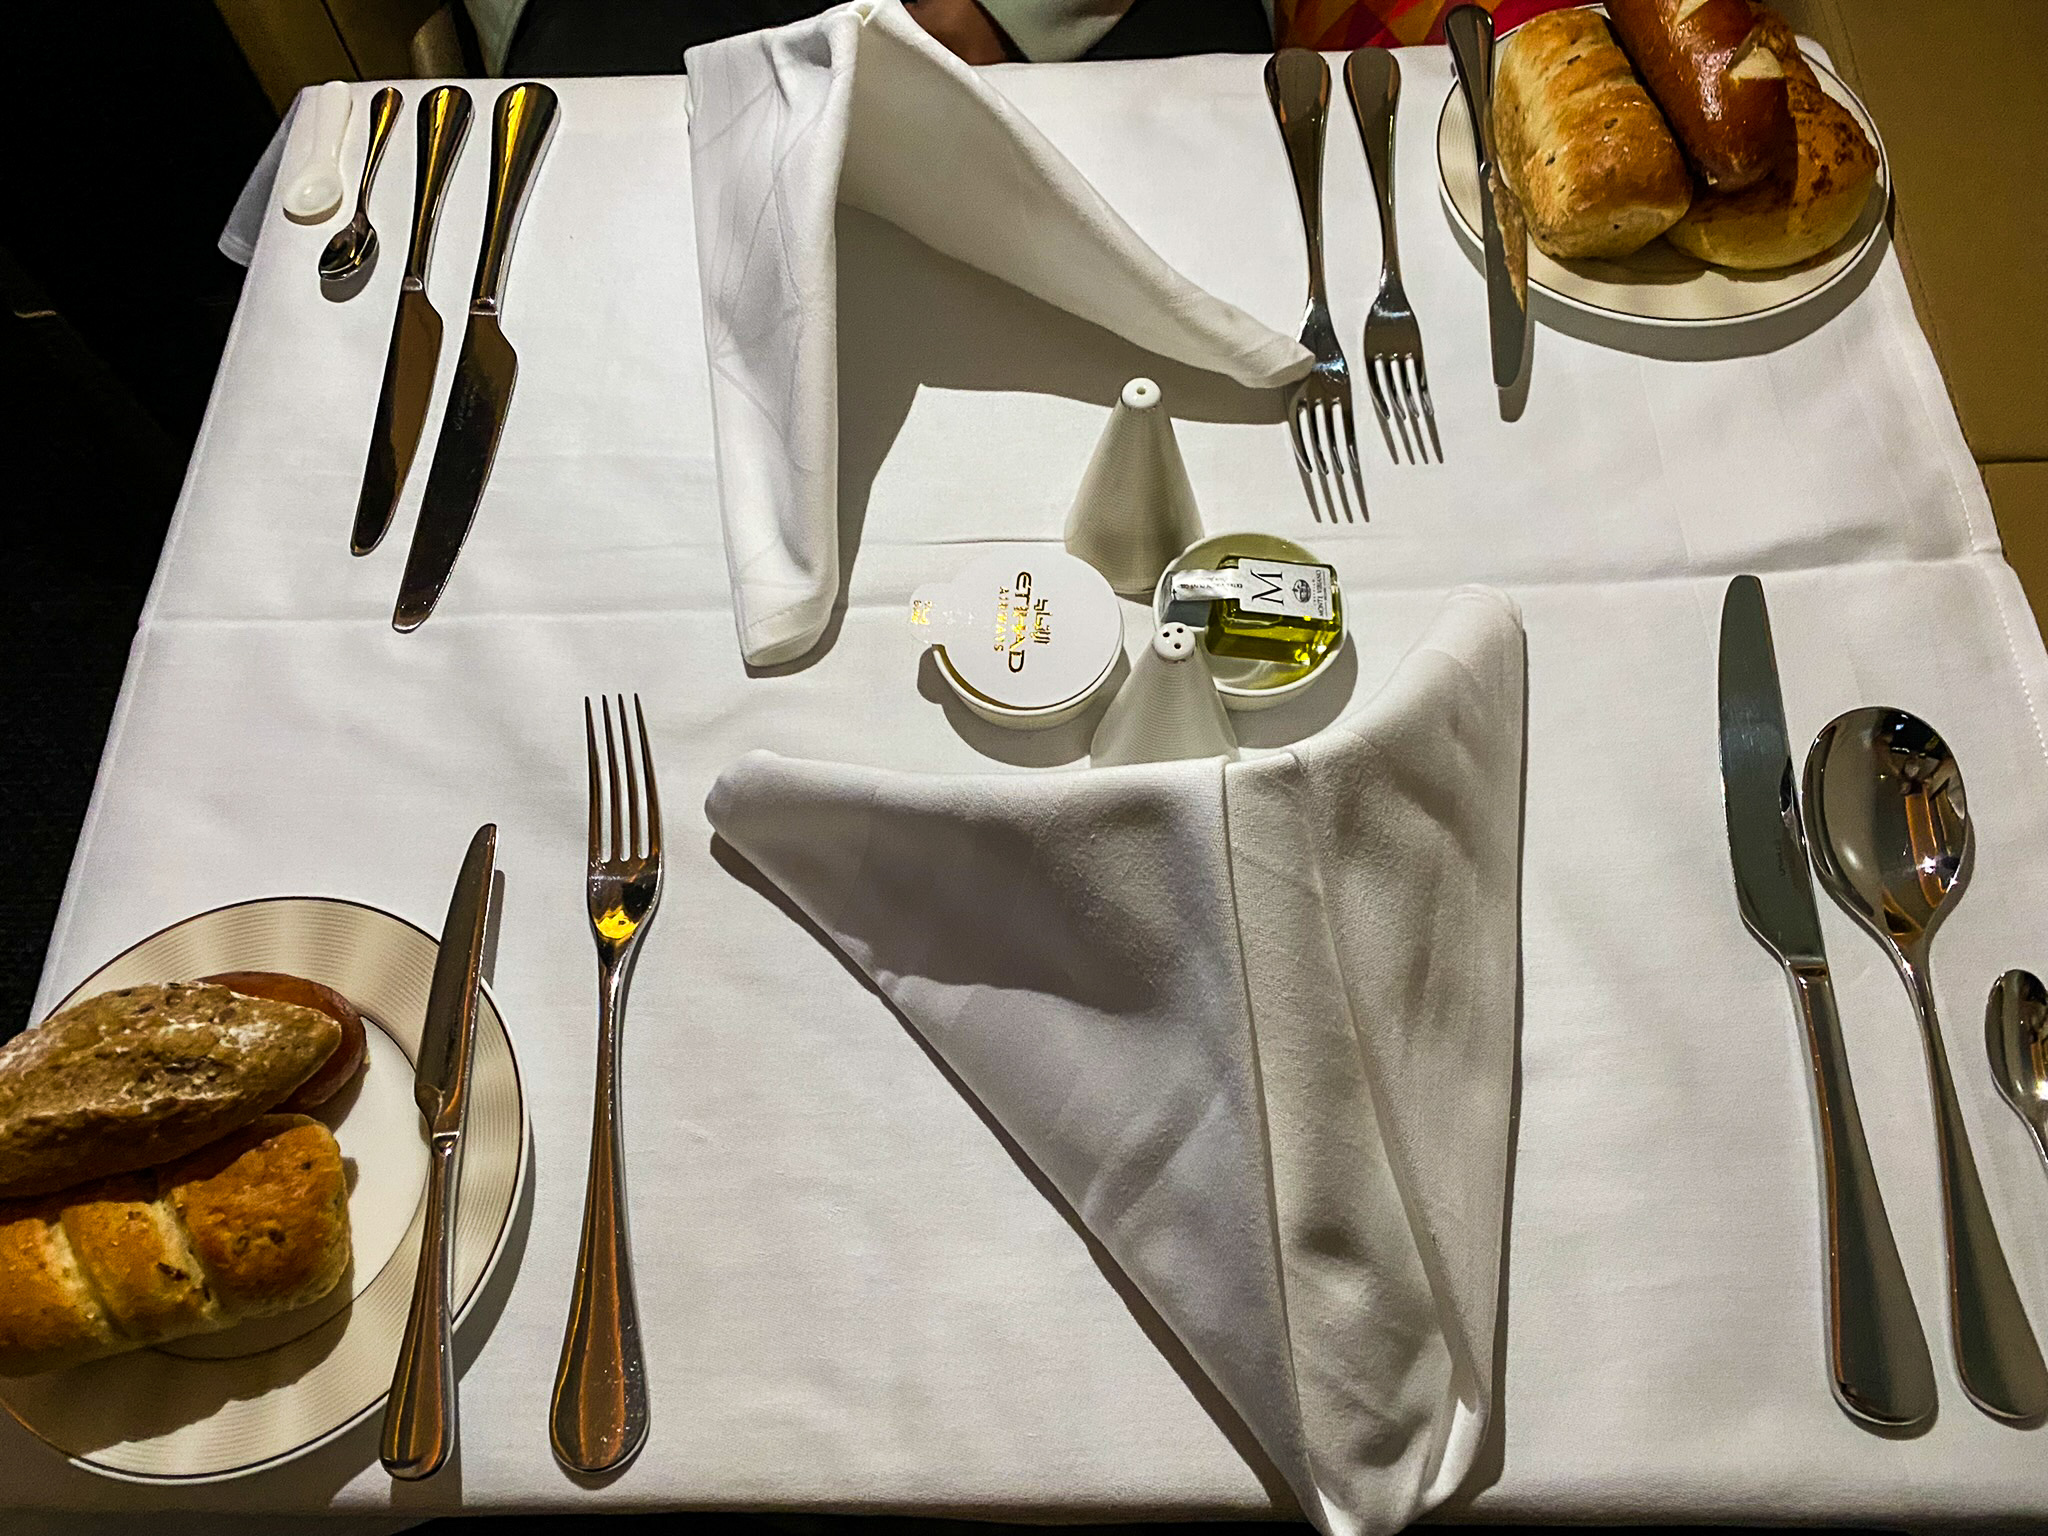 Etihad first class table setting with companion dining